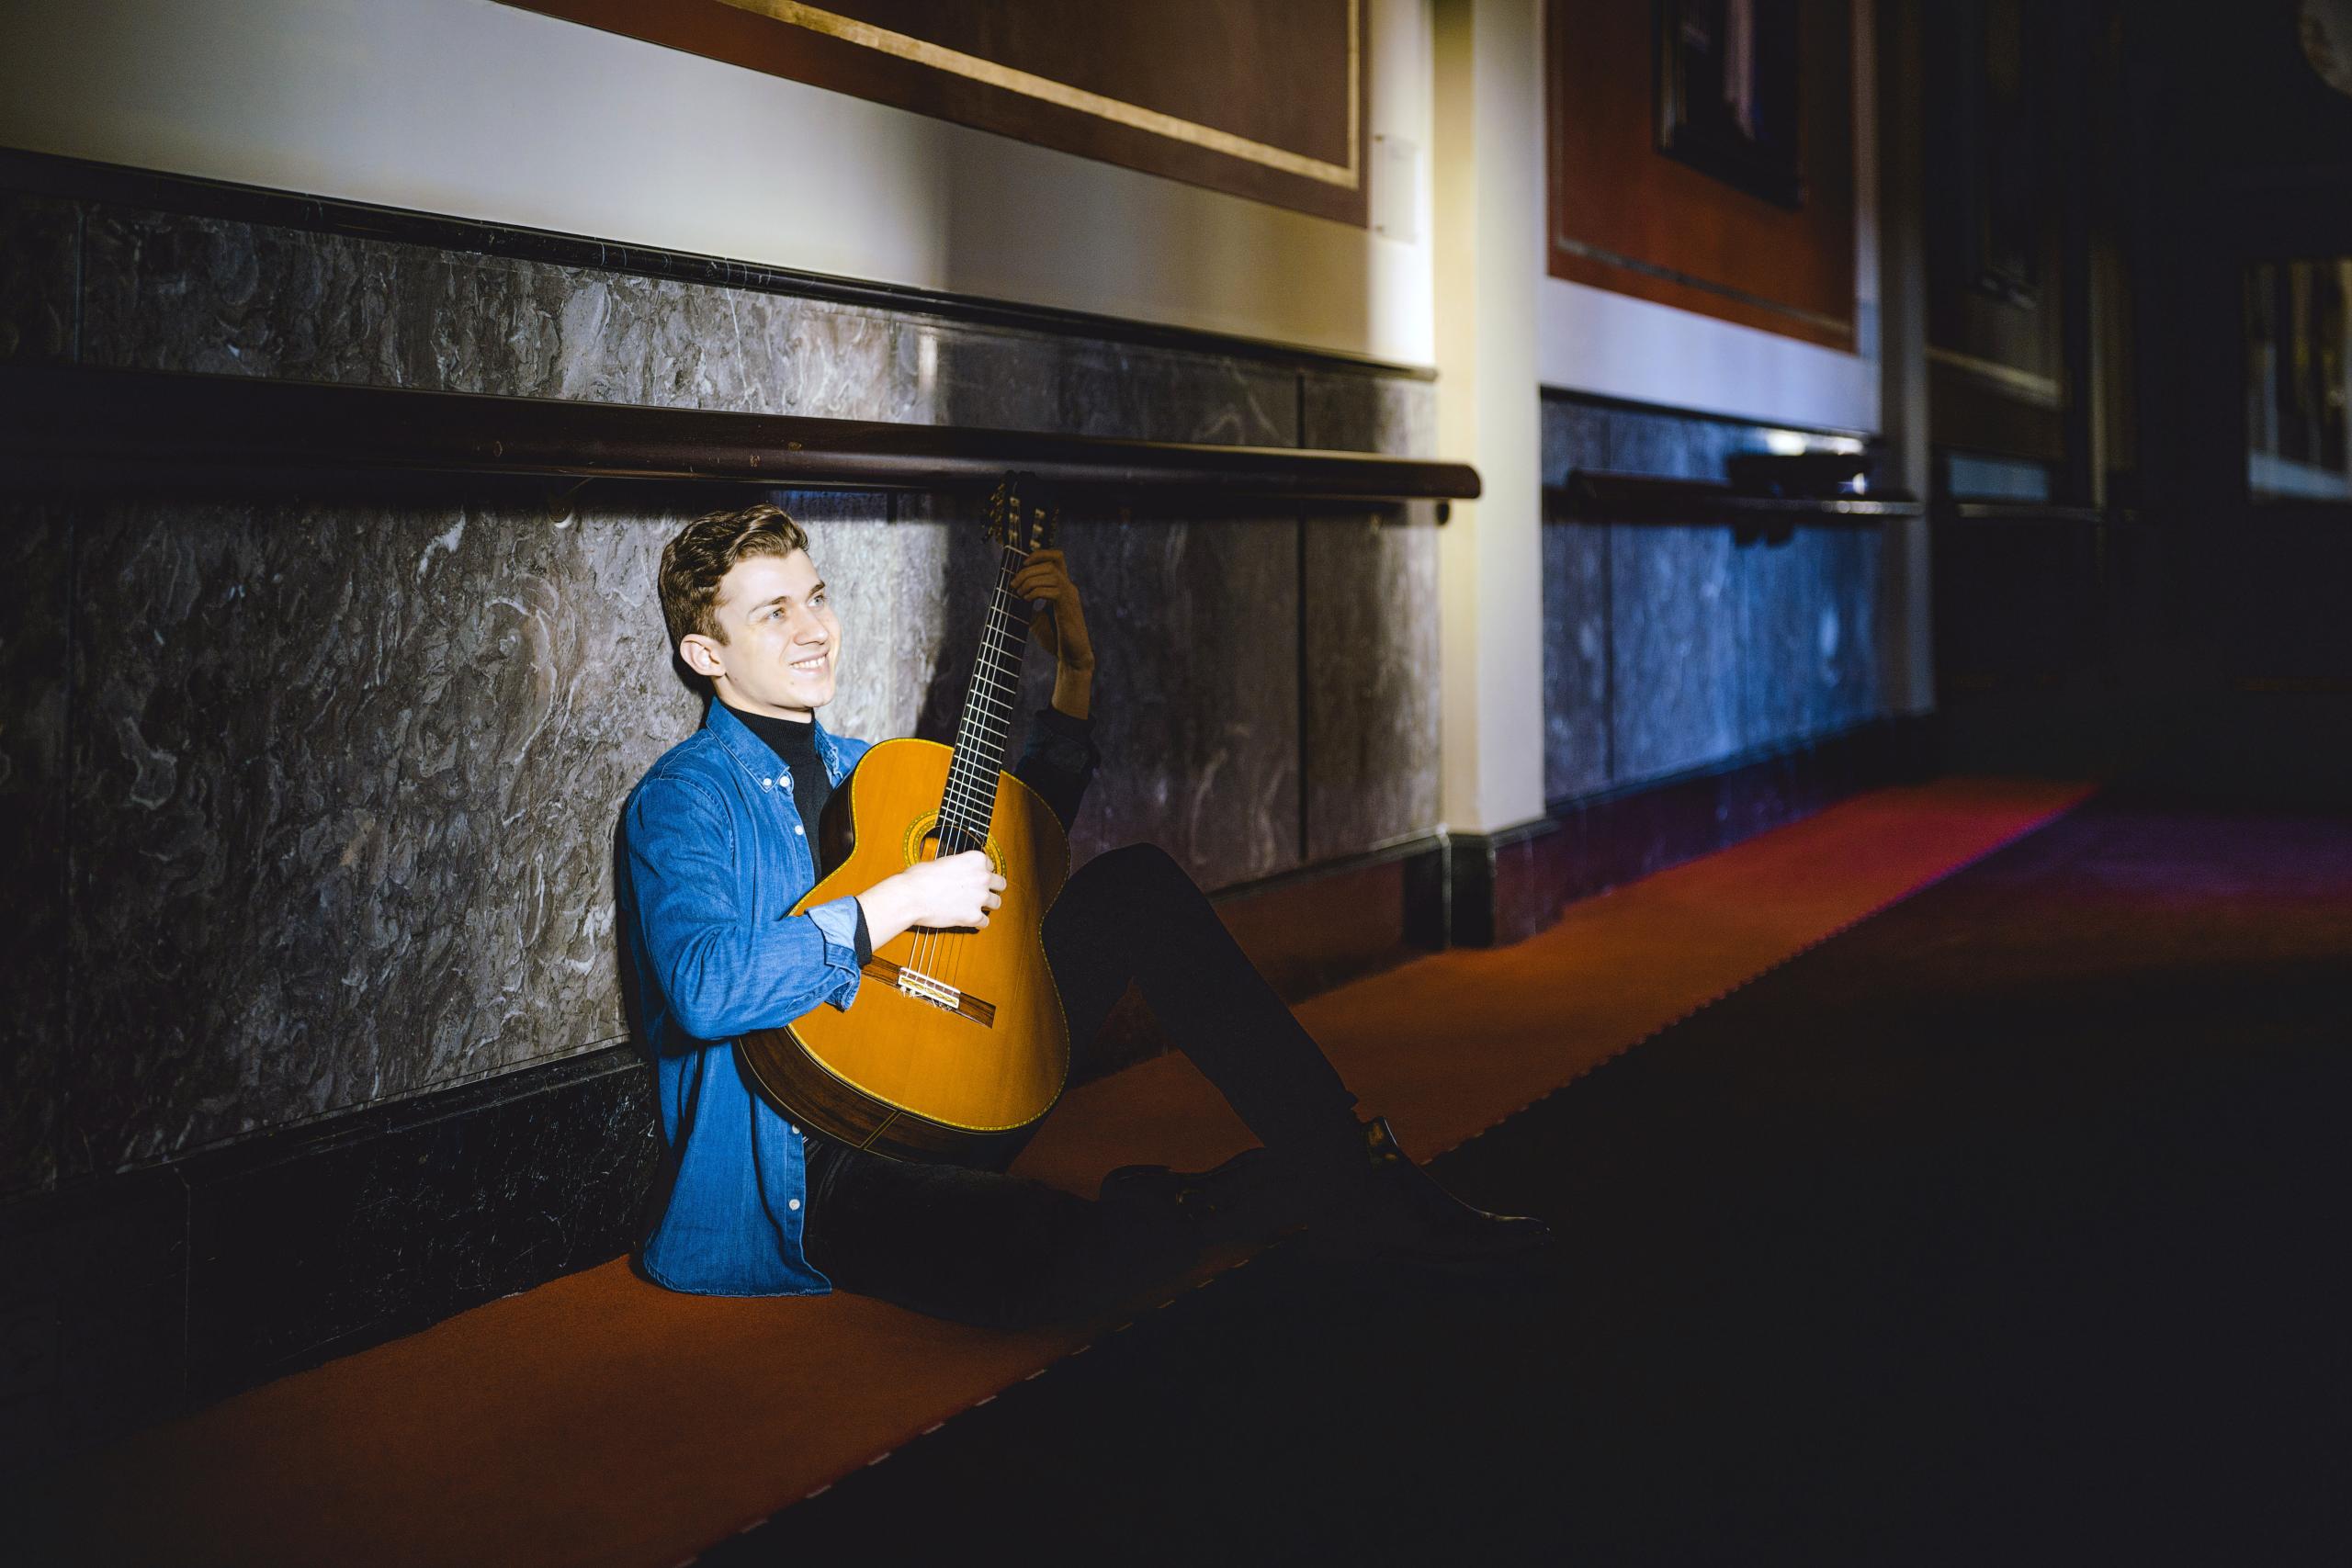 Portrait of the guitarist Thibaut Garcia. He is sitting with his guitar on the floor of a shady corridor.